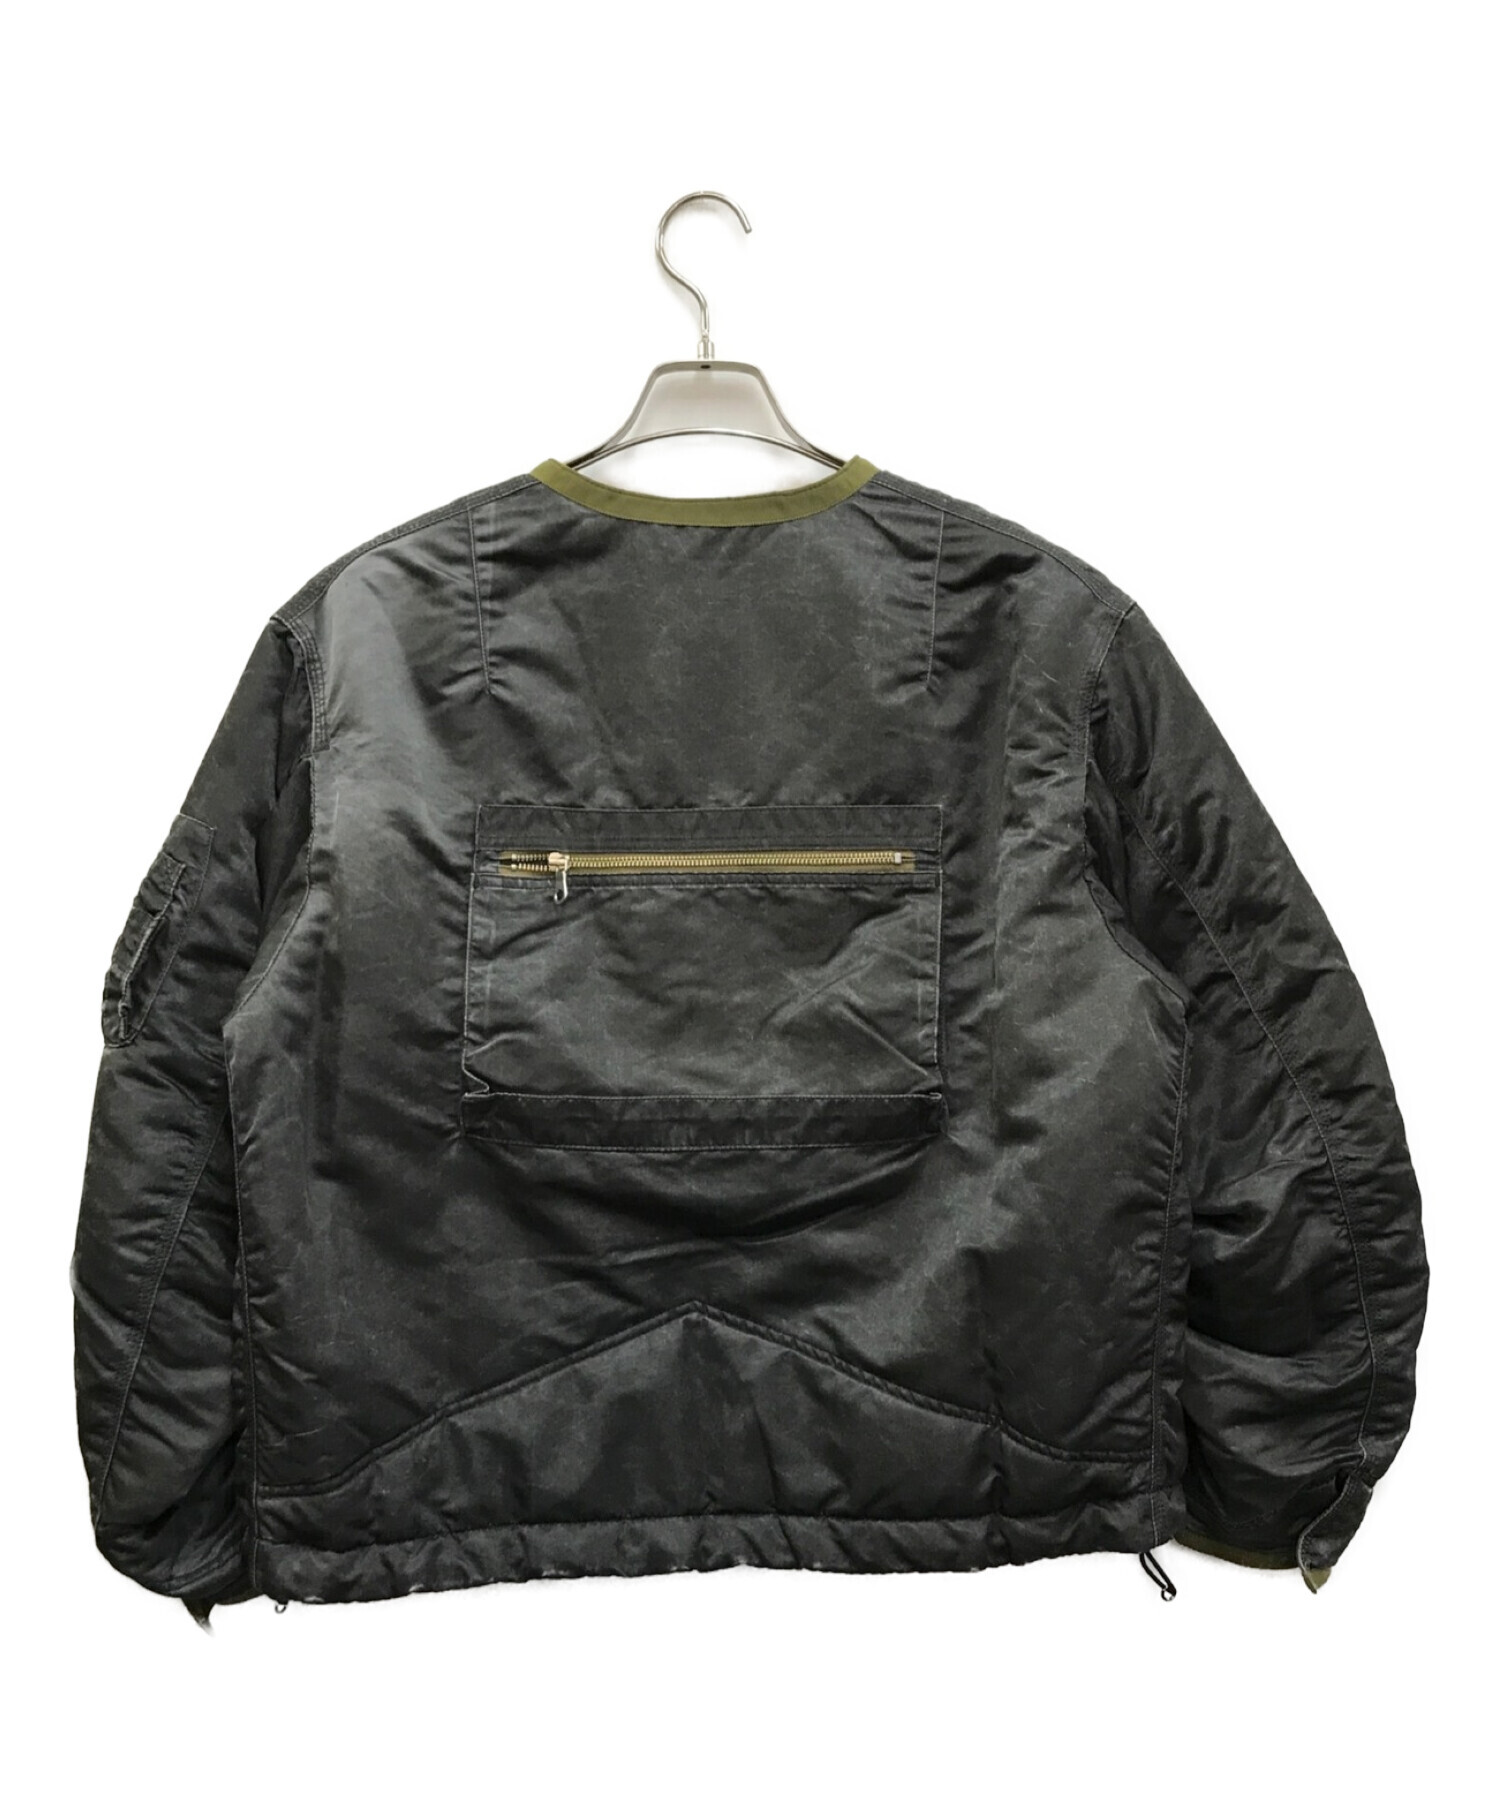 Simply Complicated CGN BOMBER JACKET